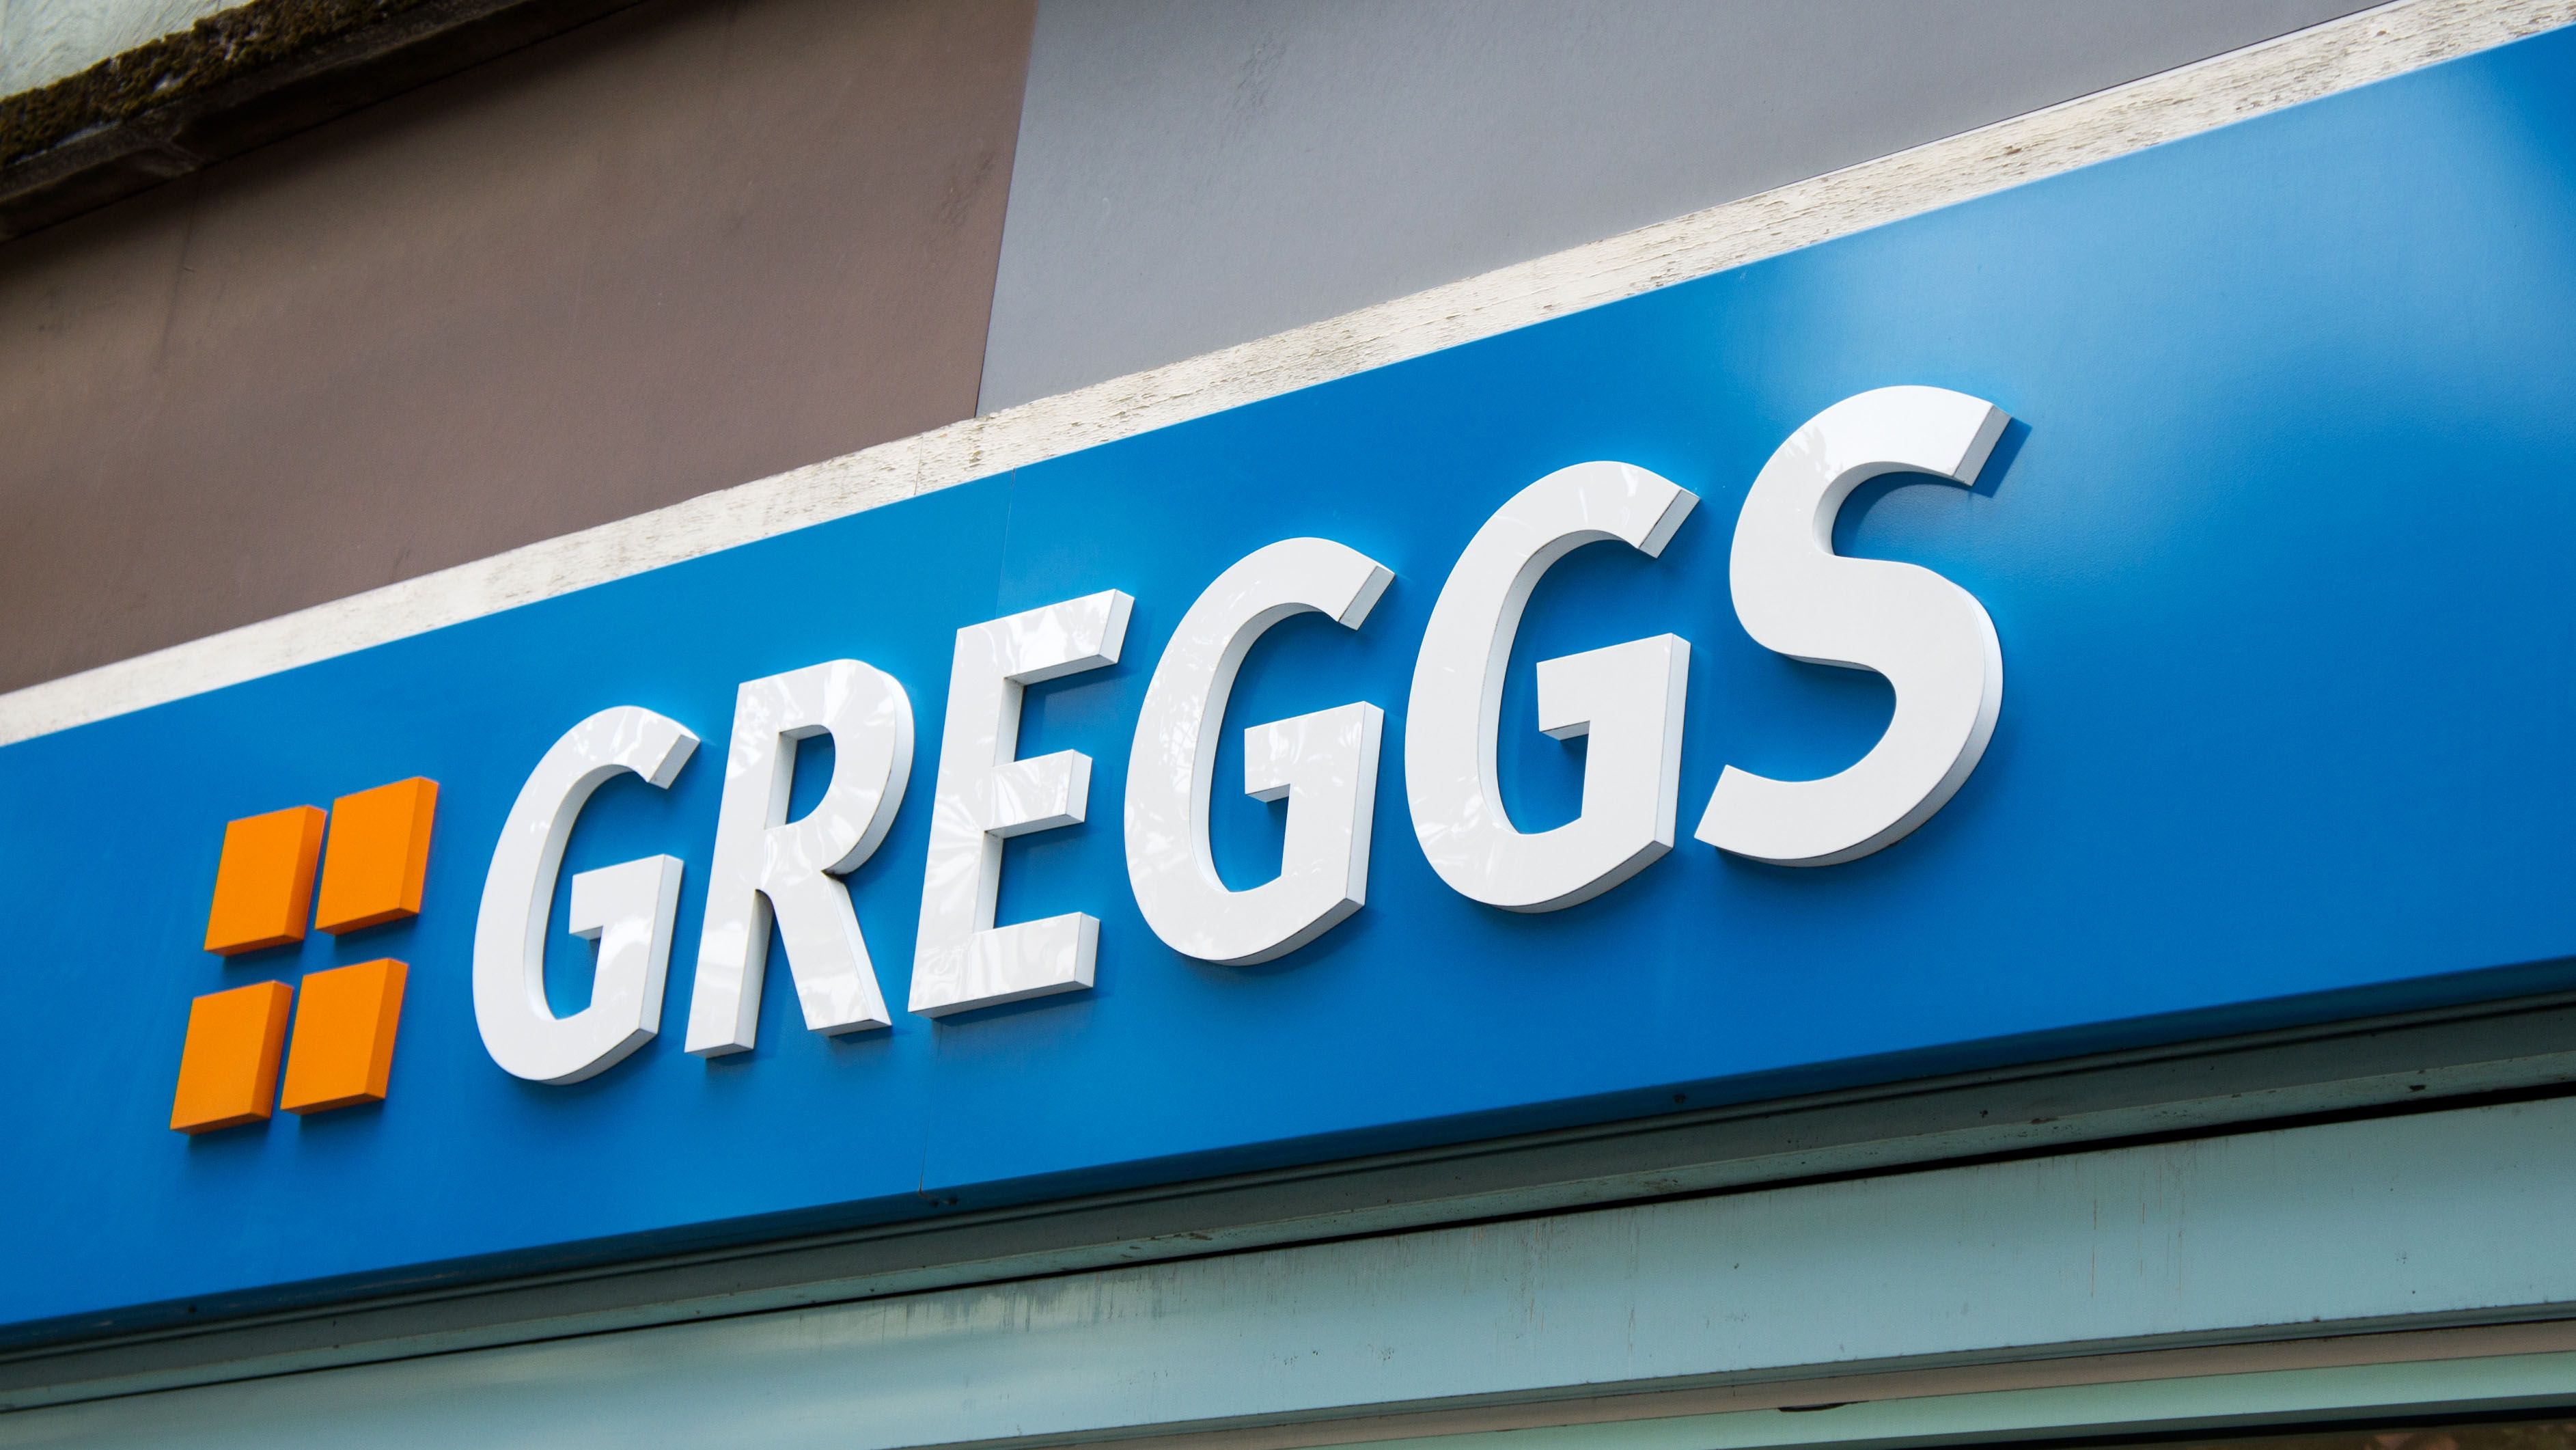 New Greggs drive-through planned for Postwick | News - Greatest Hits ...